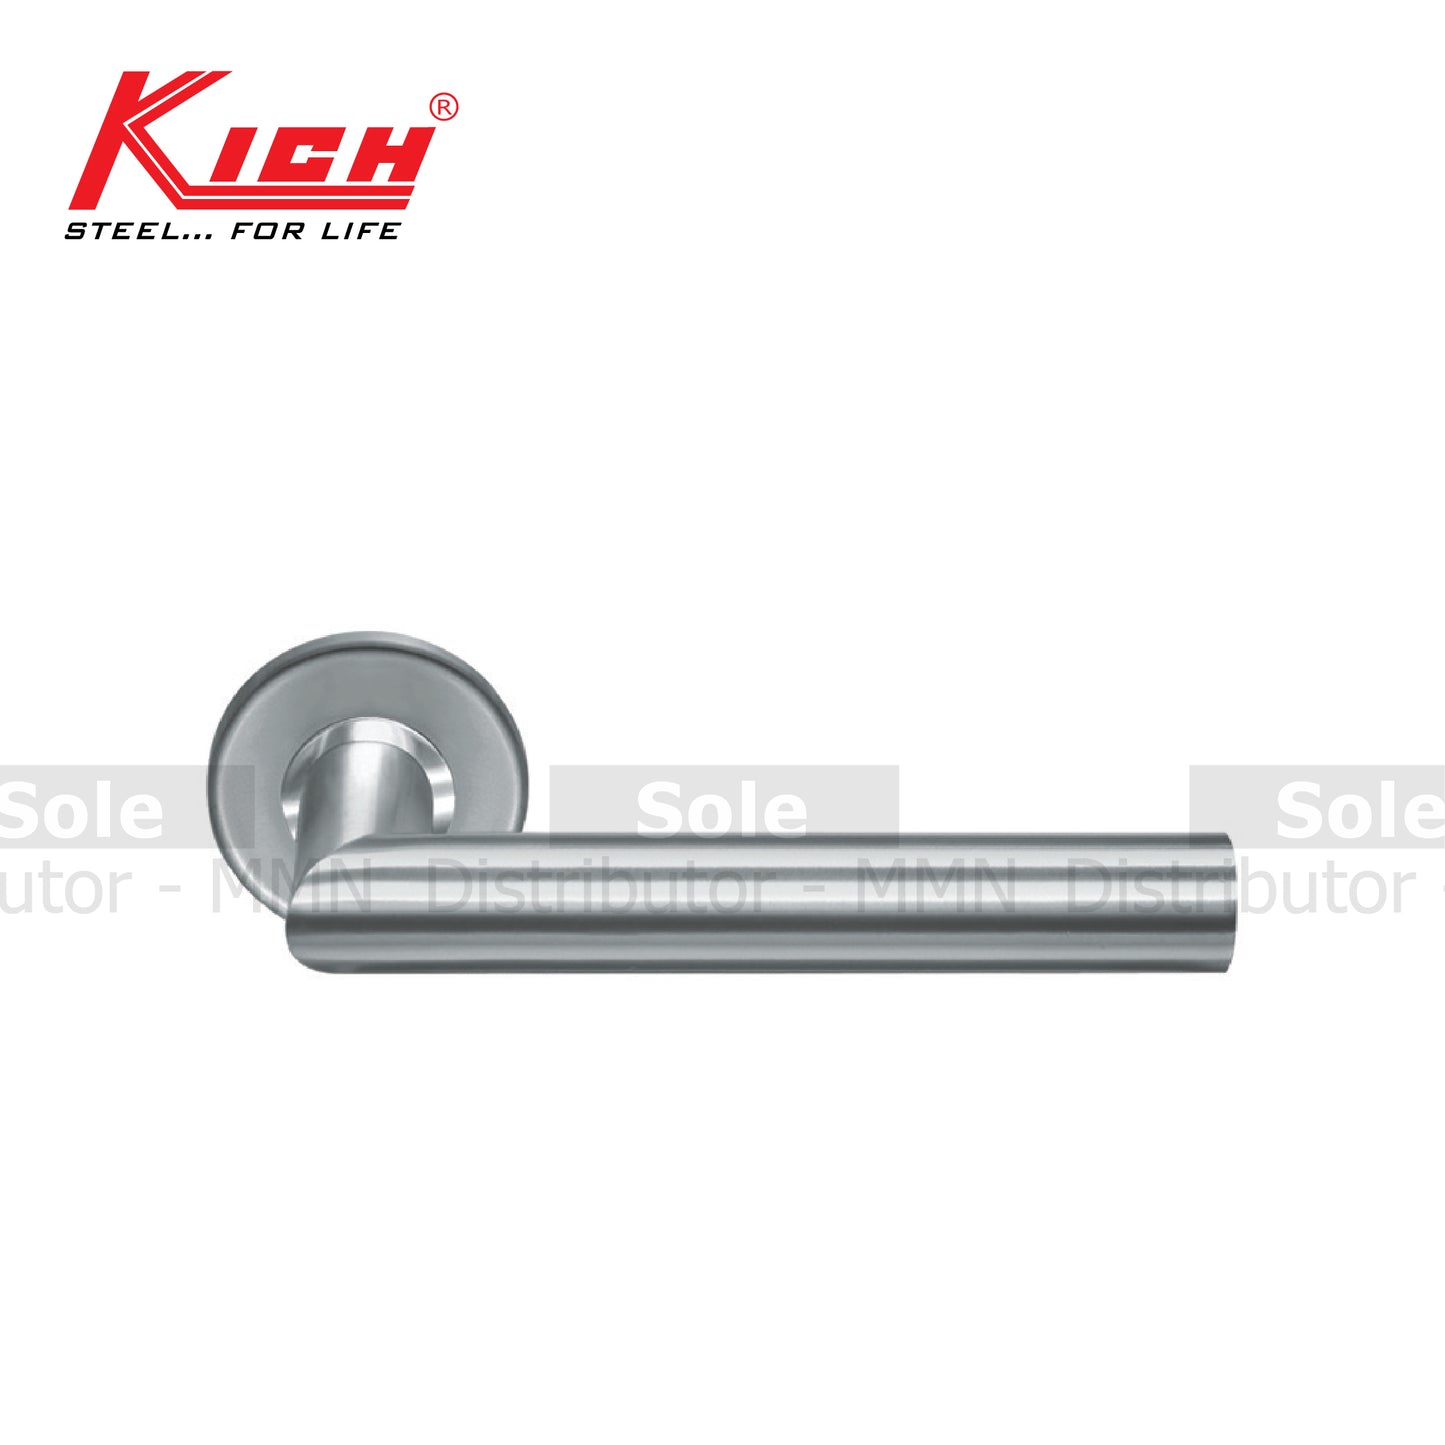 Kich Mortise Lever Handle Set With Escutcheons, Diameter 19mm, 316 Stainless Steel Finish- KLH1921SS